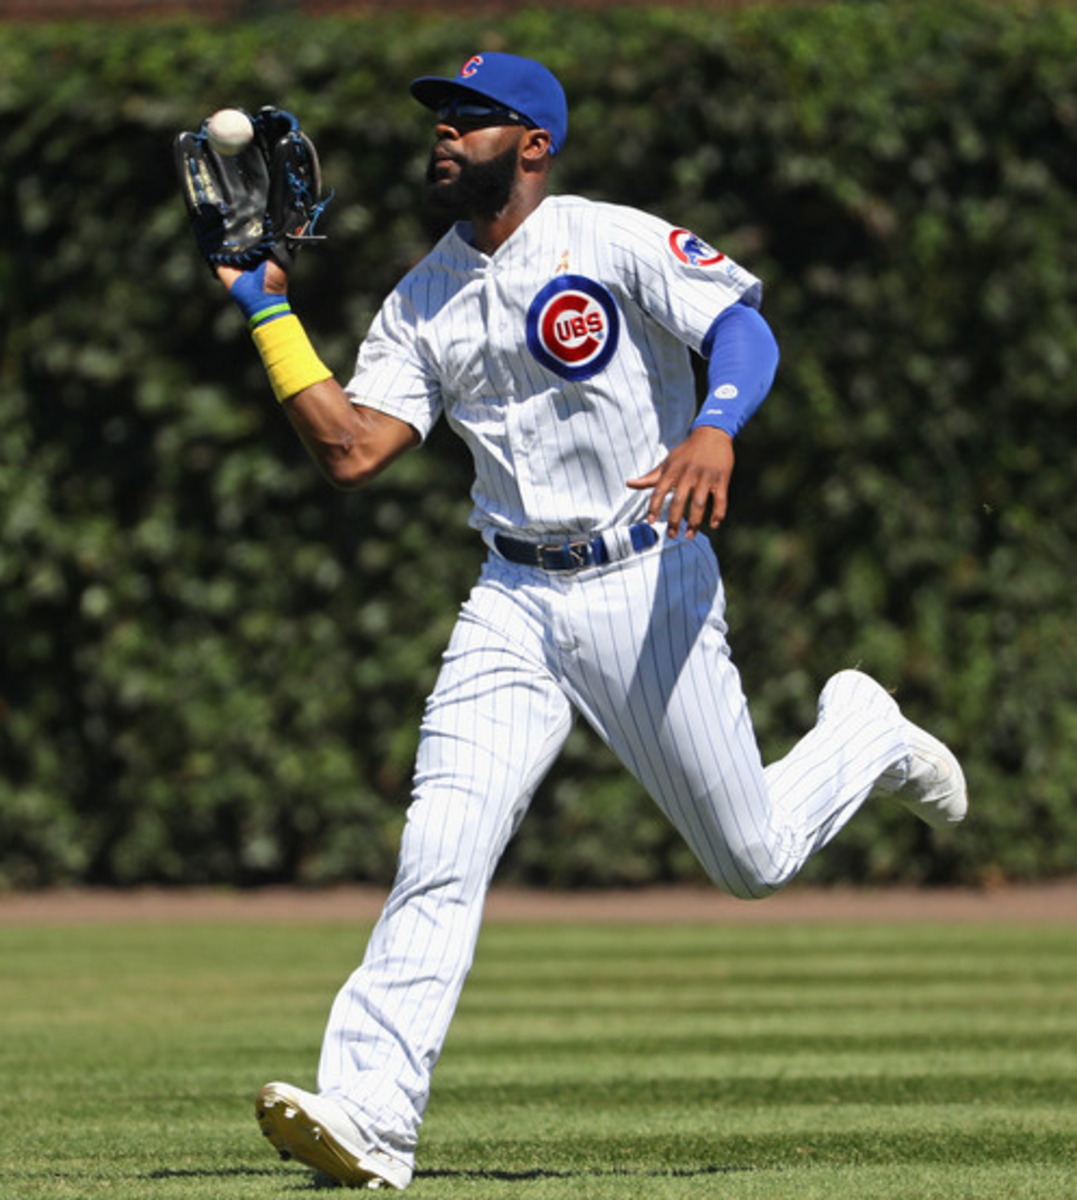 If the Cubs want to maximize Heyward's worth in 2020, expect him to move back to right field permanently and only play a minimal amount of center field.Source: Zimbio